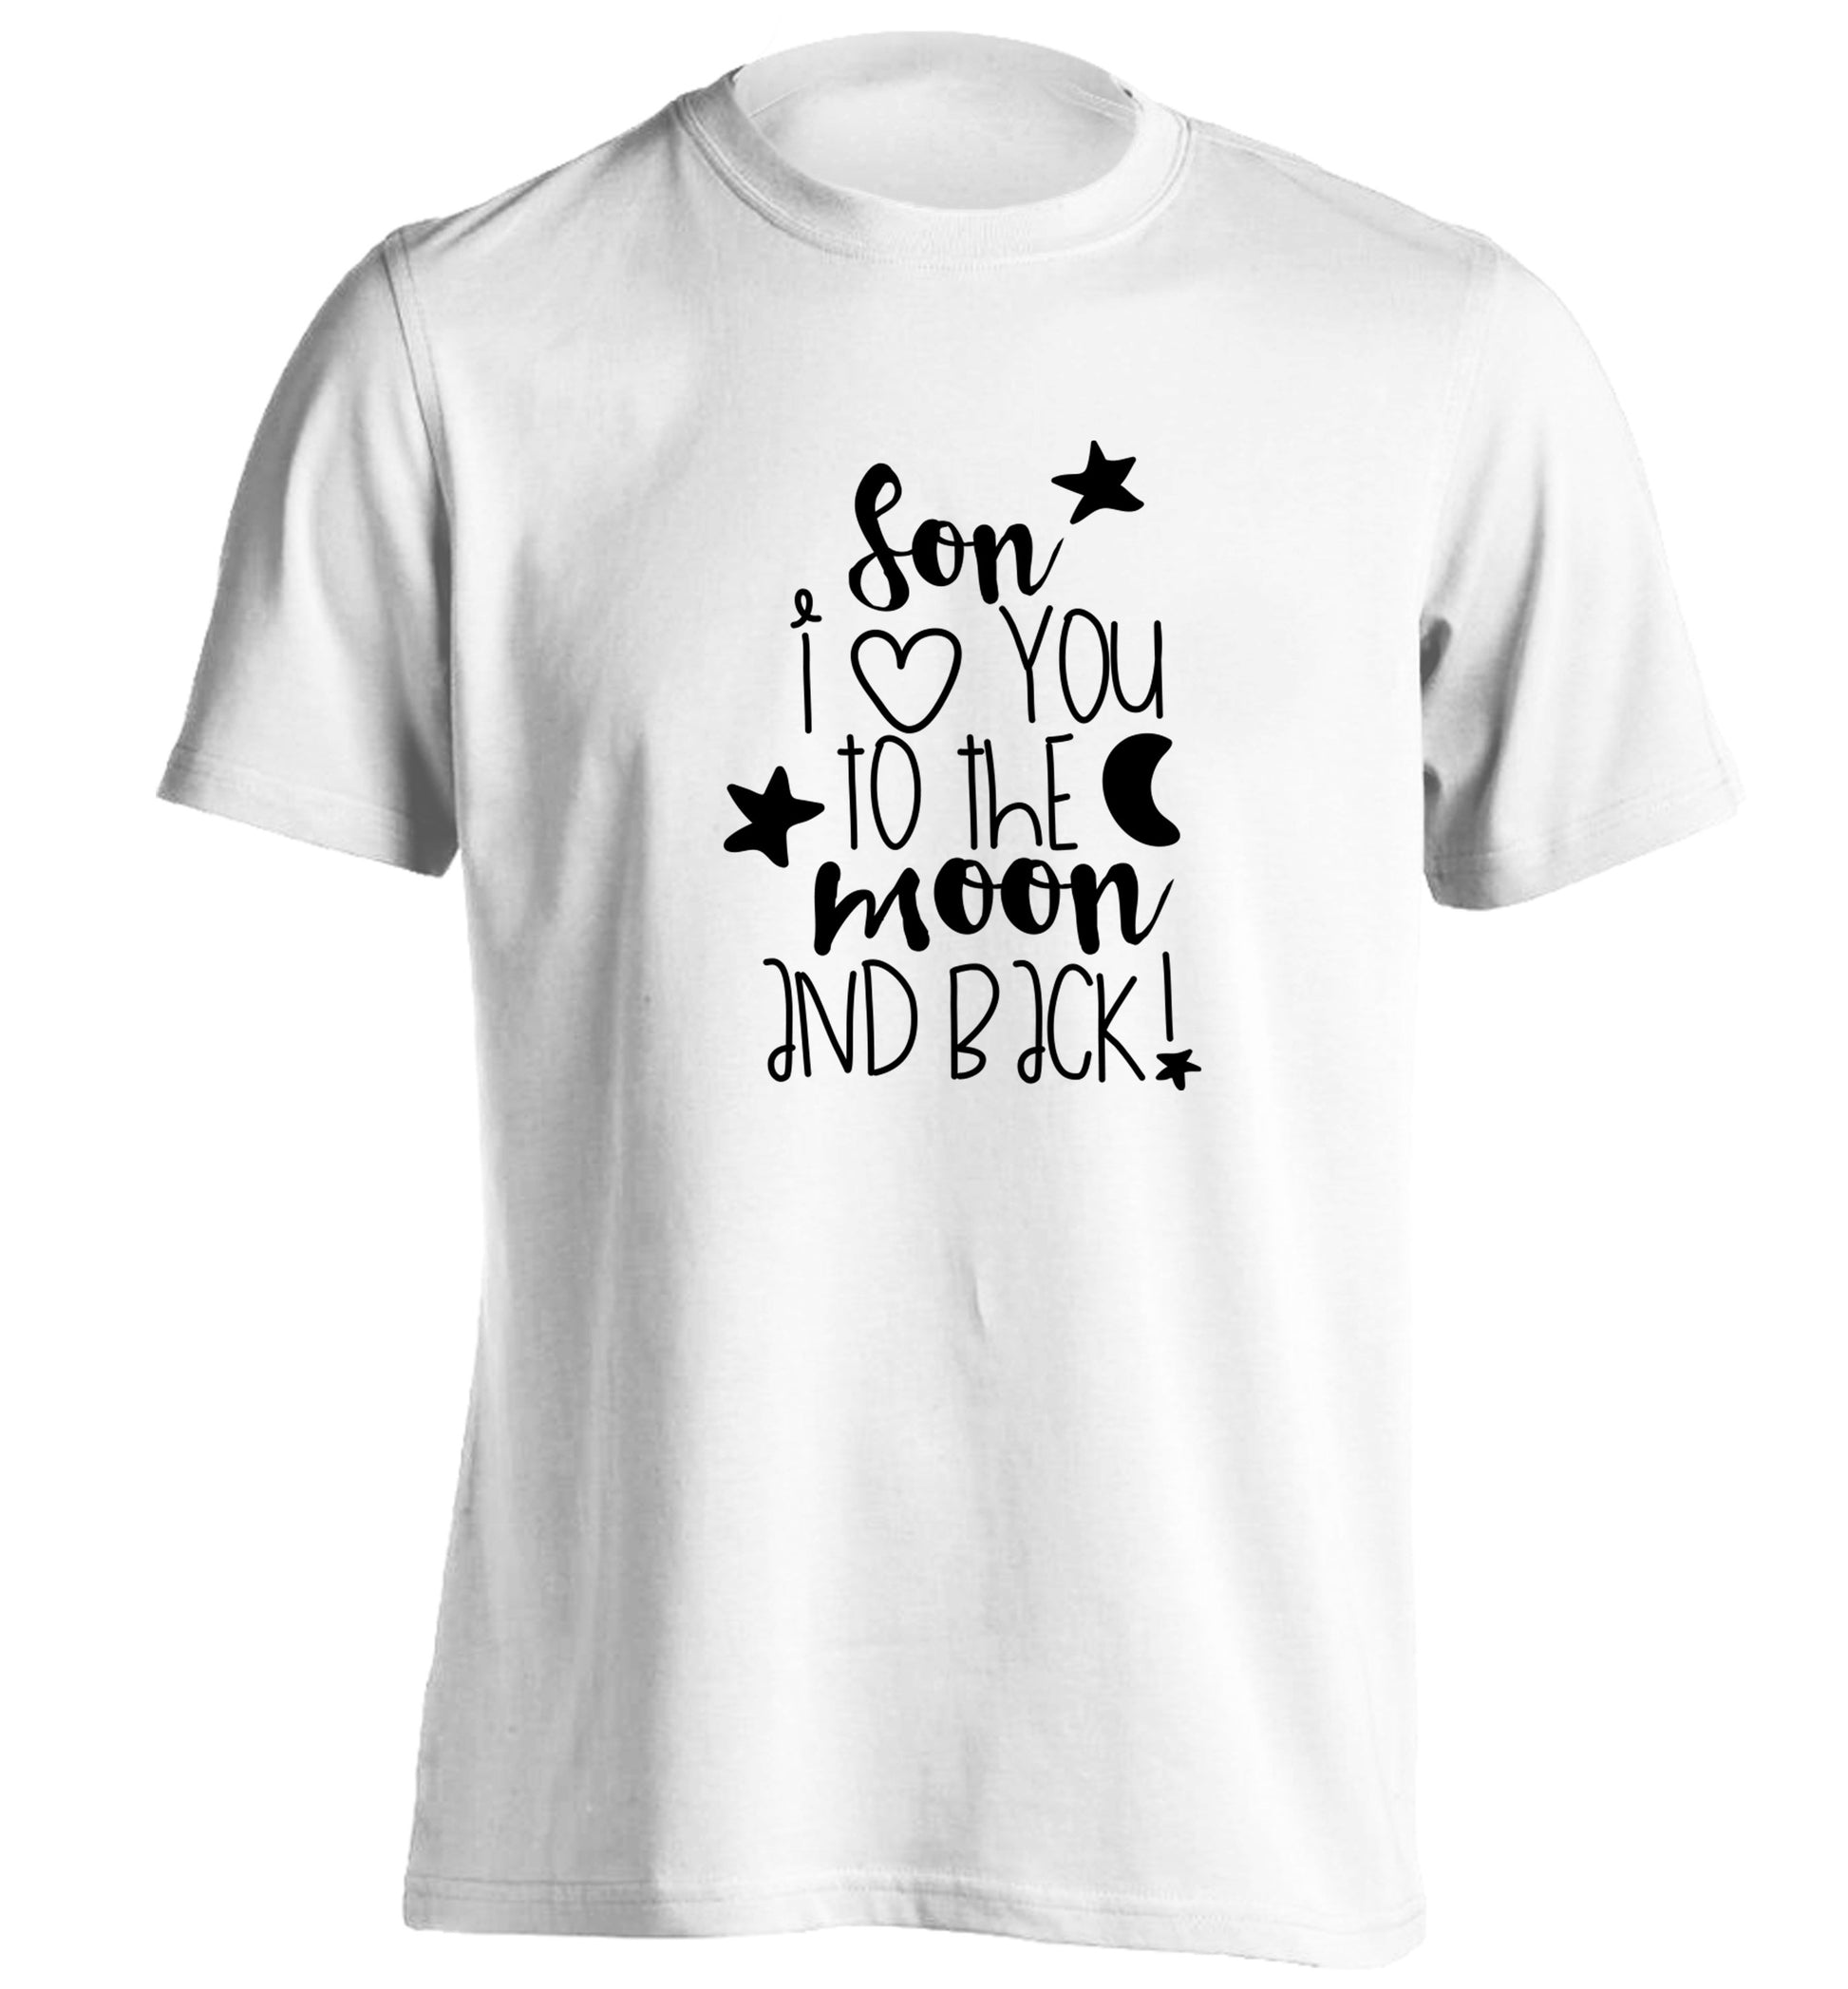 Son I love you to the moon and back adults unisex white Tshirt 2XL